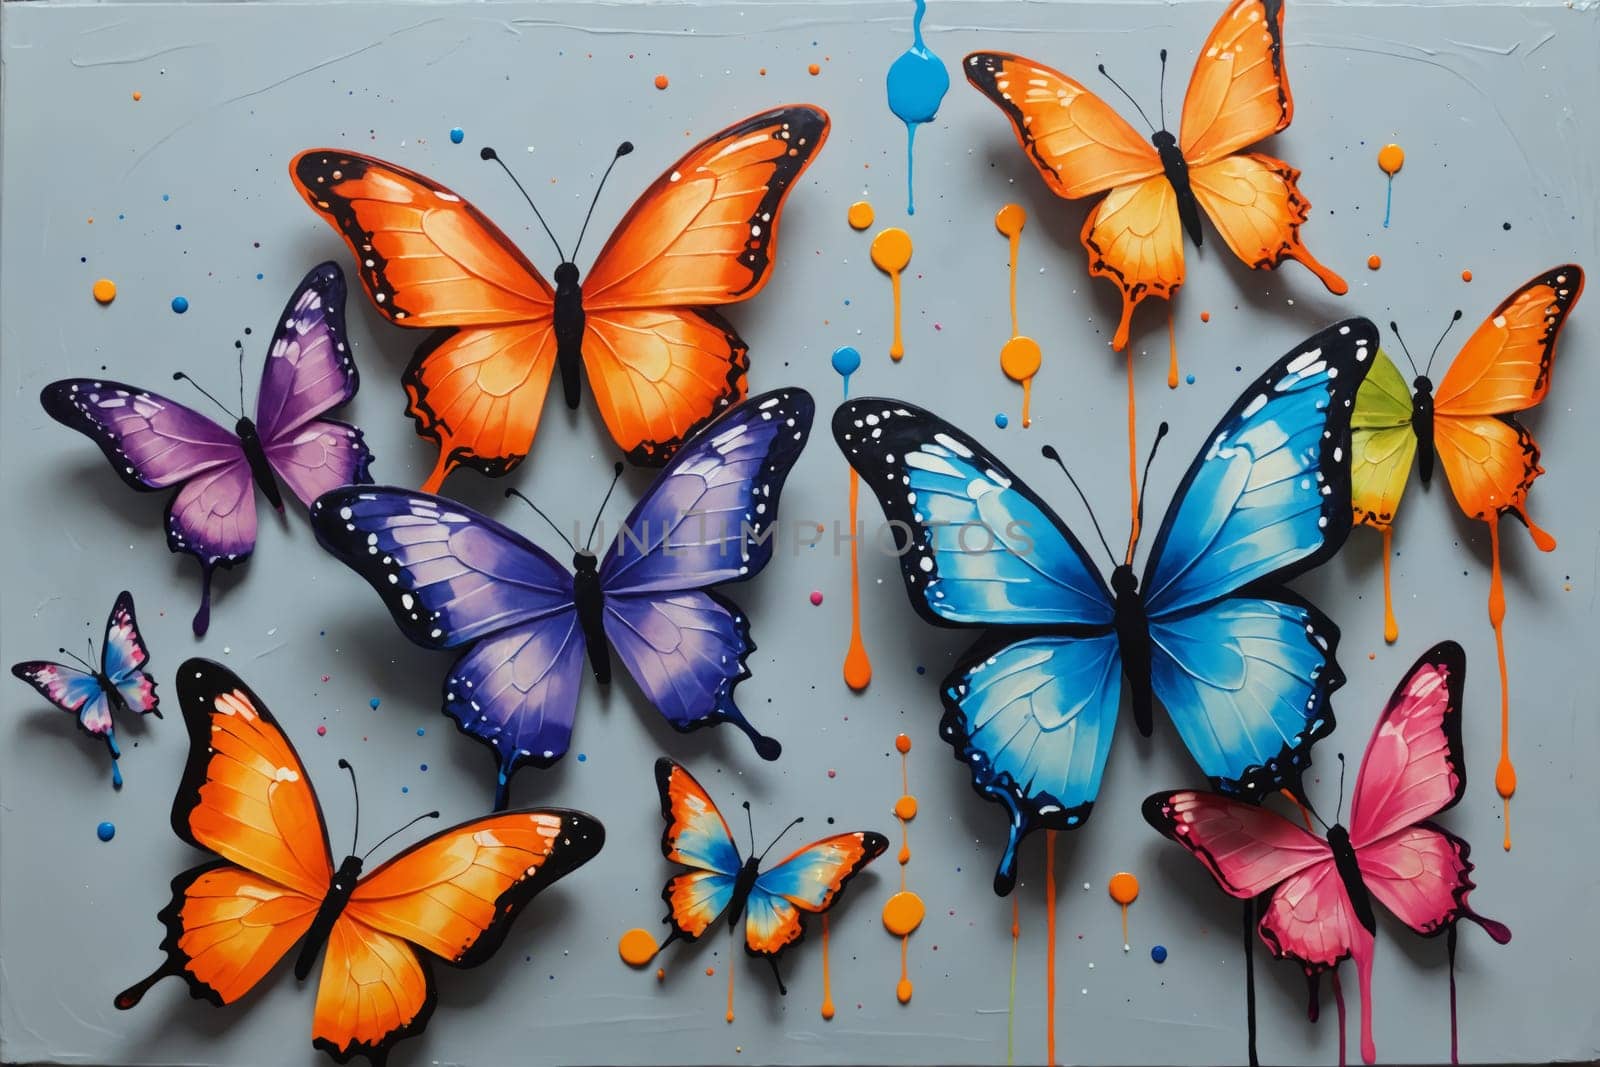 An artistic composition portraying Monarch butterflies dance against a vibrant splash of watercolor. This artwork is great for projects that require a fusion of realism and abstraction in a bright and lively setting.